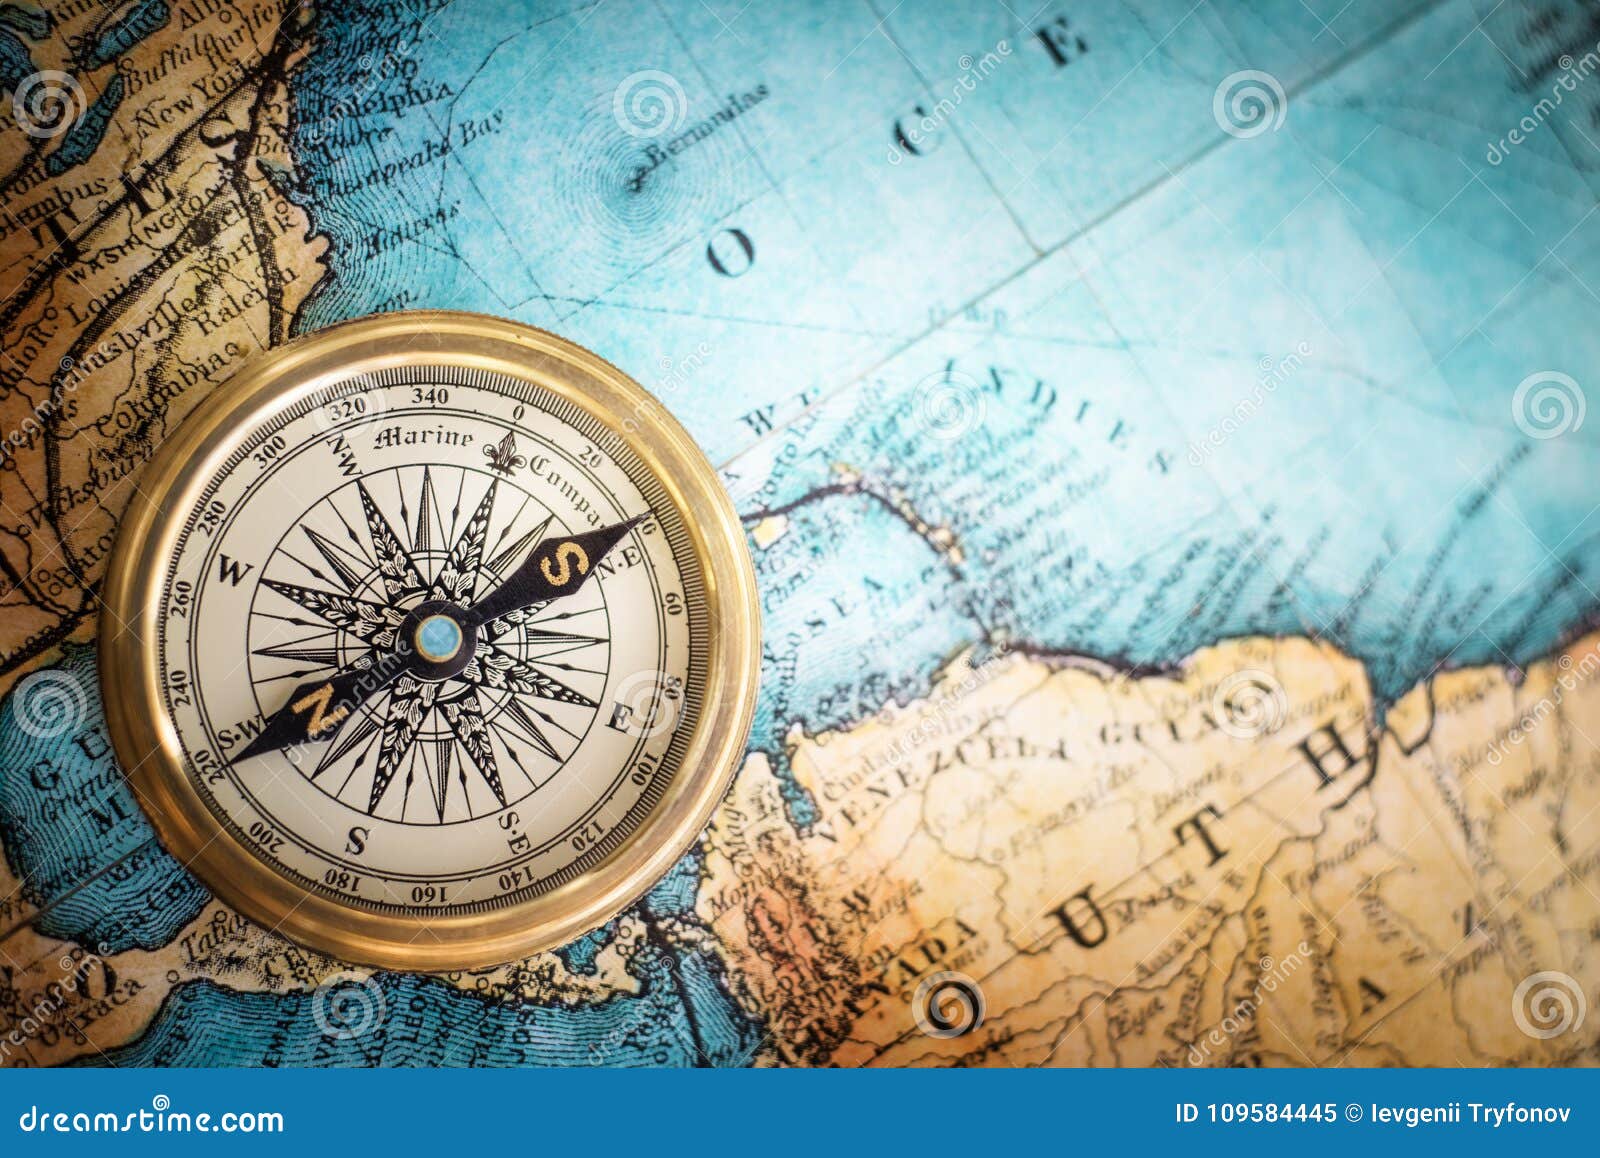 old vintage retro compass on ancient map background.